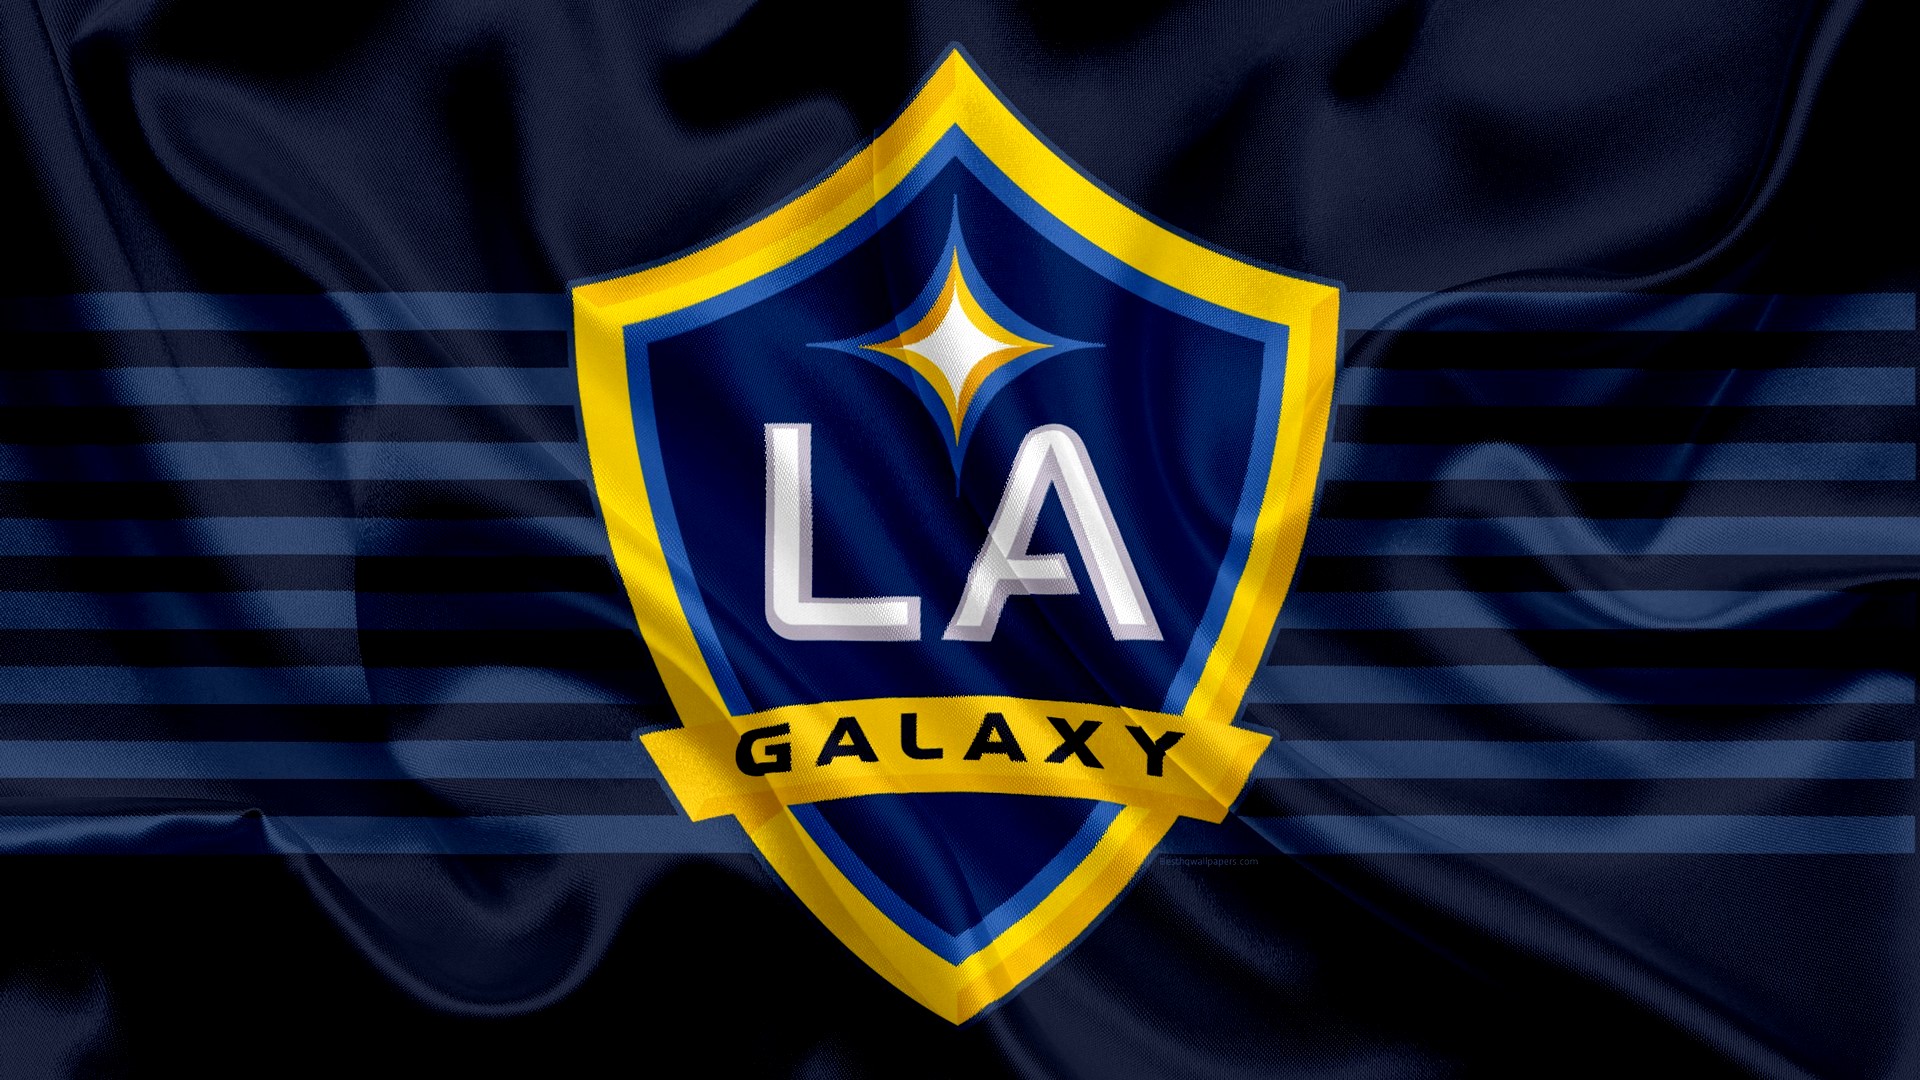 Los Angeles Galaxy Wallpaper HD with high-resolution 1920x1080 pixel. You can use this wallpaper for your Desktop Computers, Mac Screensavers, Windows Backgrounds, iPhone Wallpapers, Tablet or Android Lock screen and another Mobile device